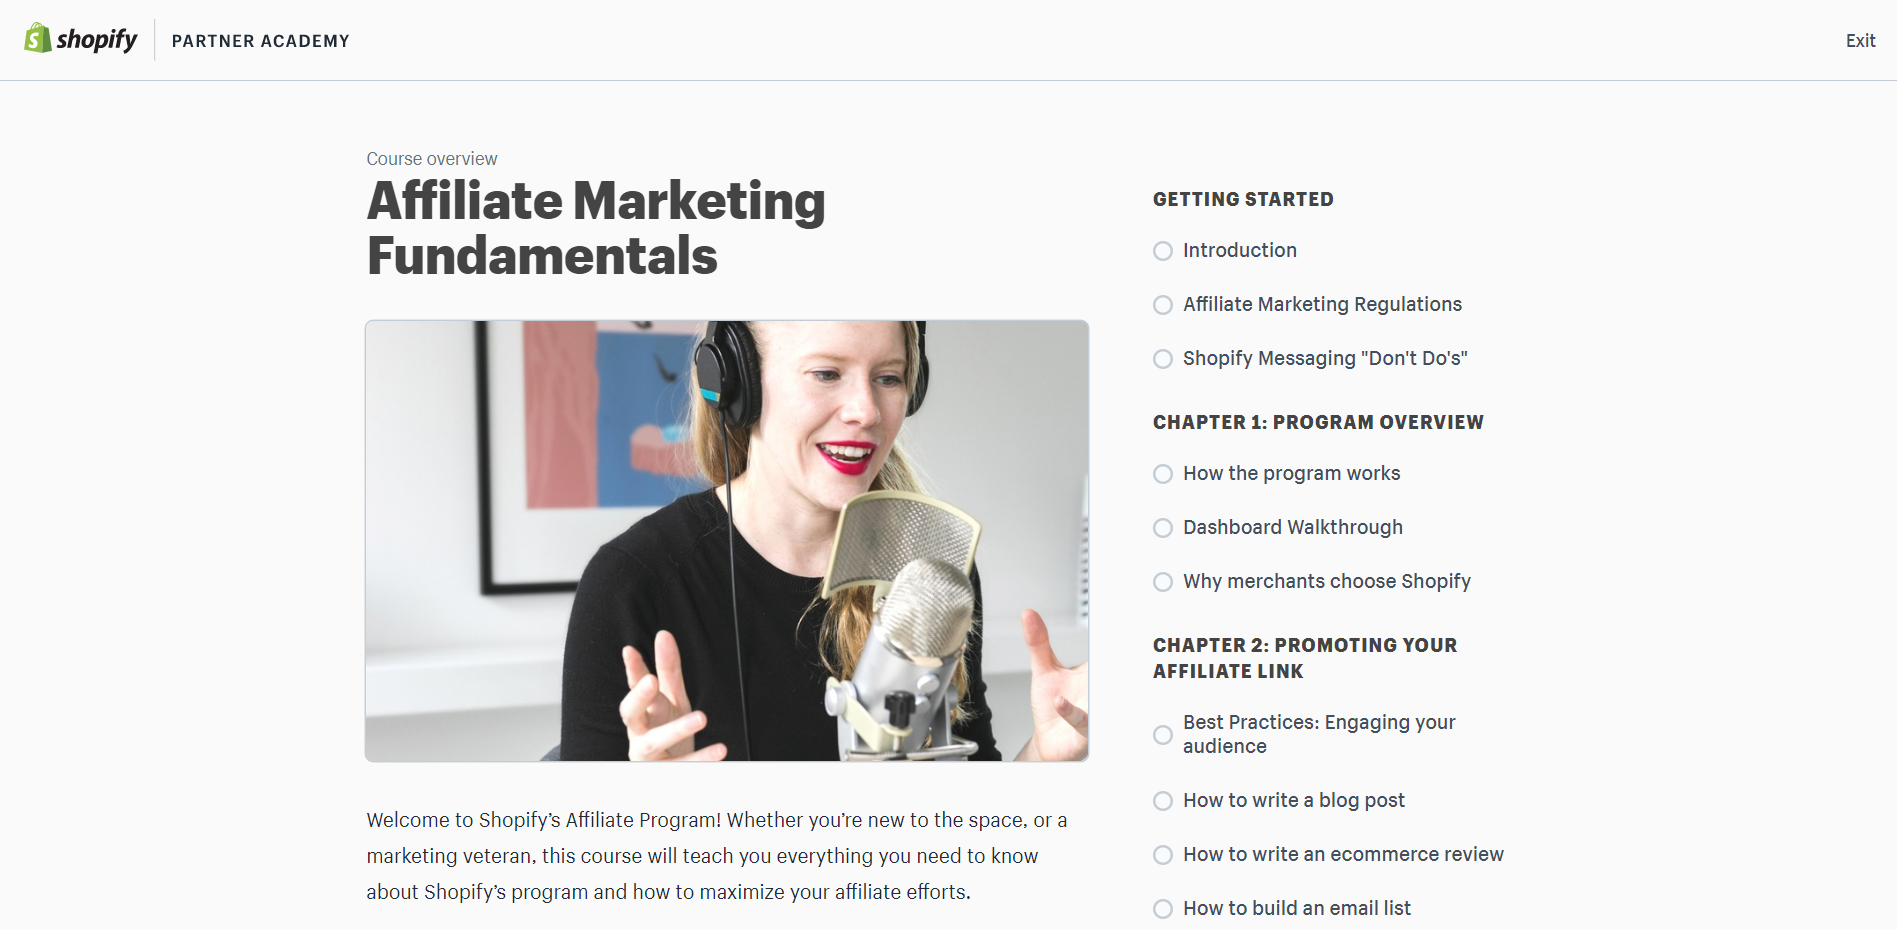 The Shopify Academy for affiliate marketing page